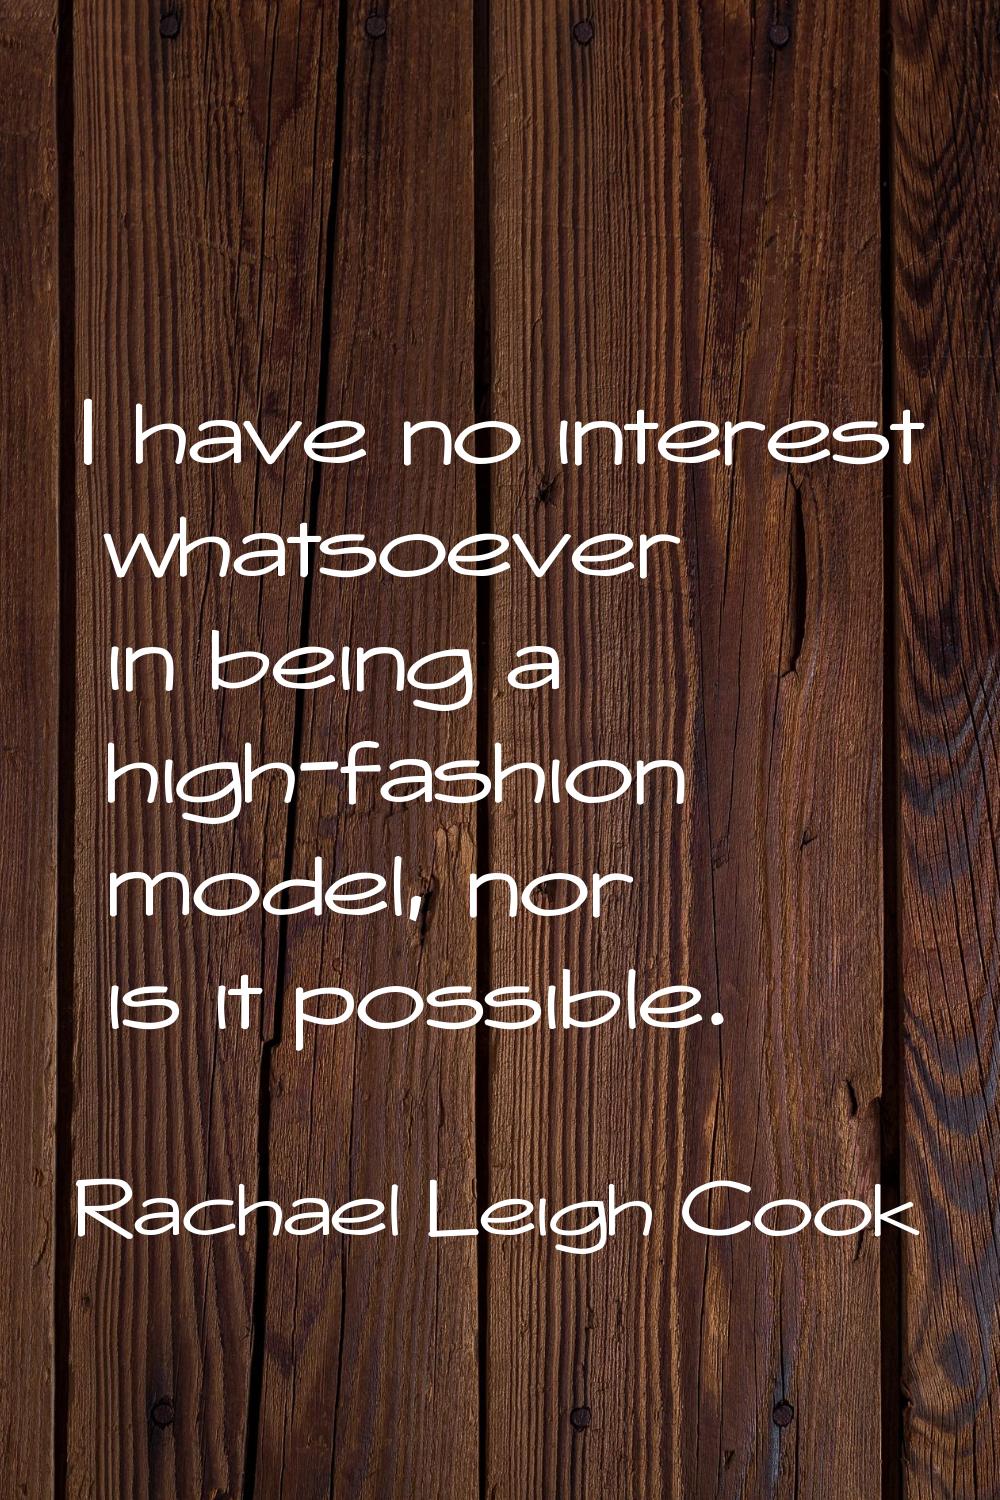 I have no interest whatsoever in being a high-fashion model, nor is it possible.